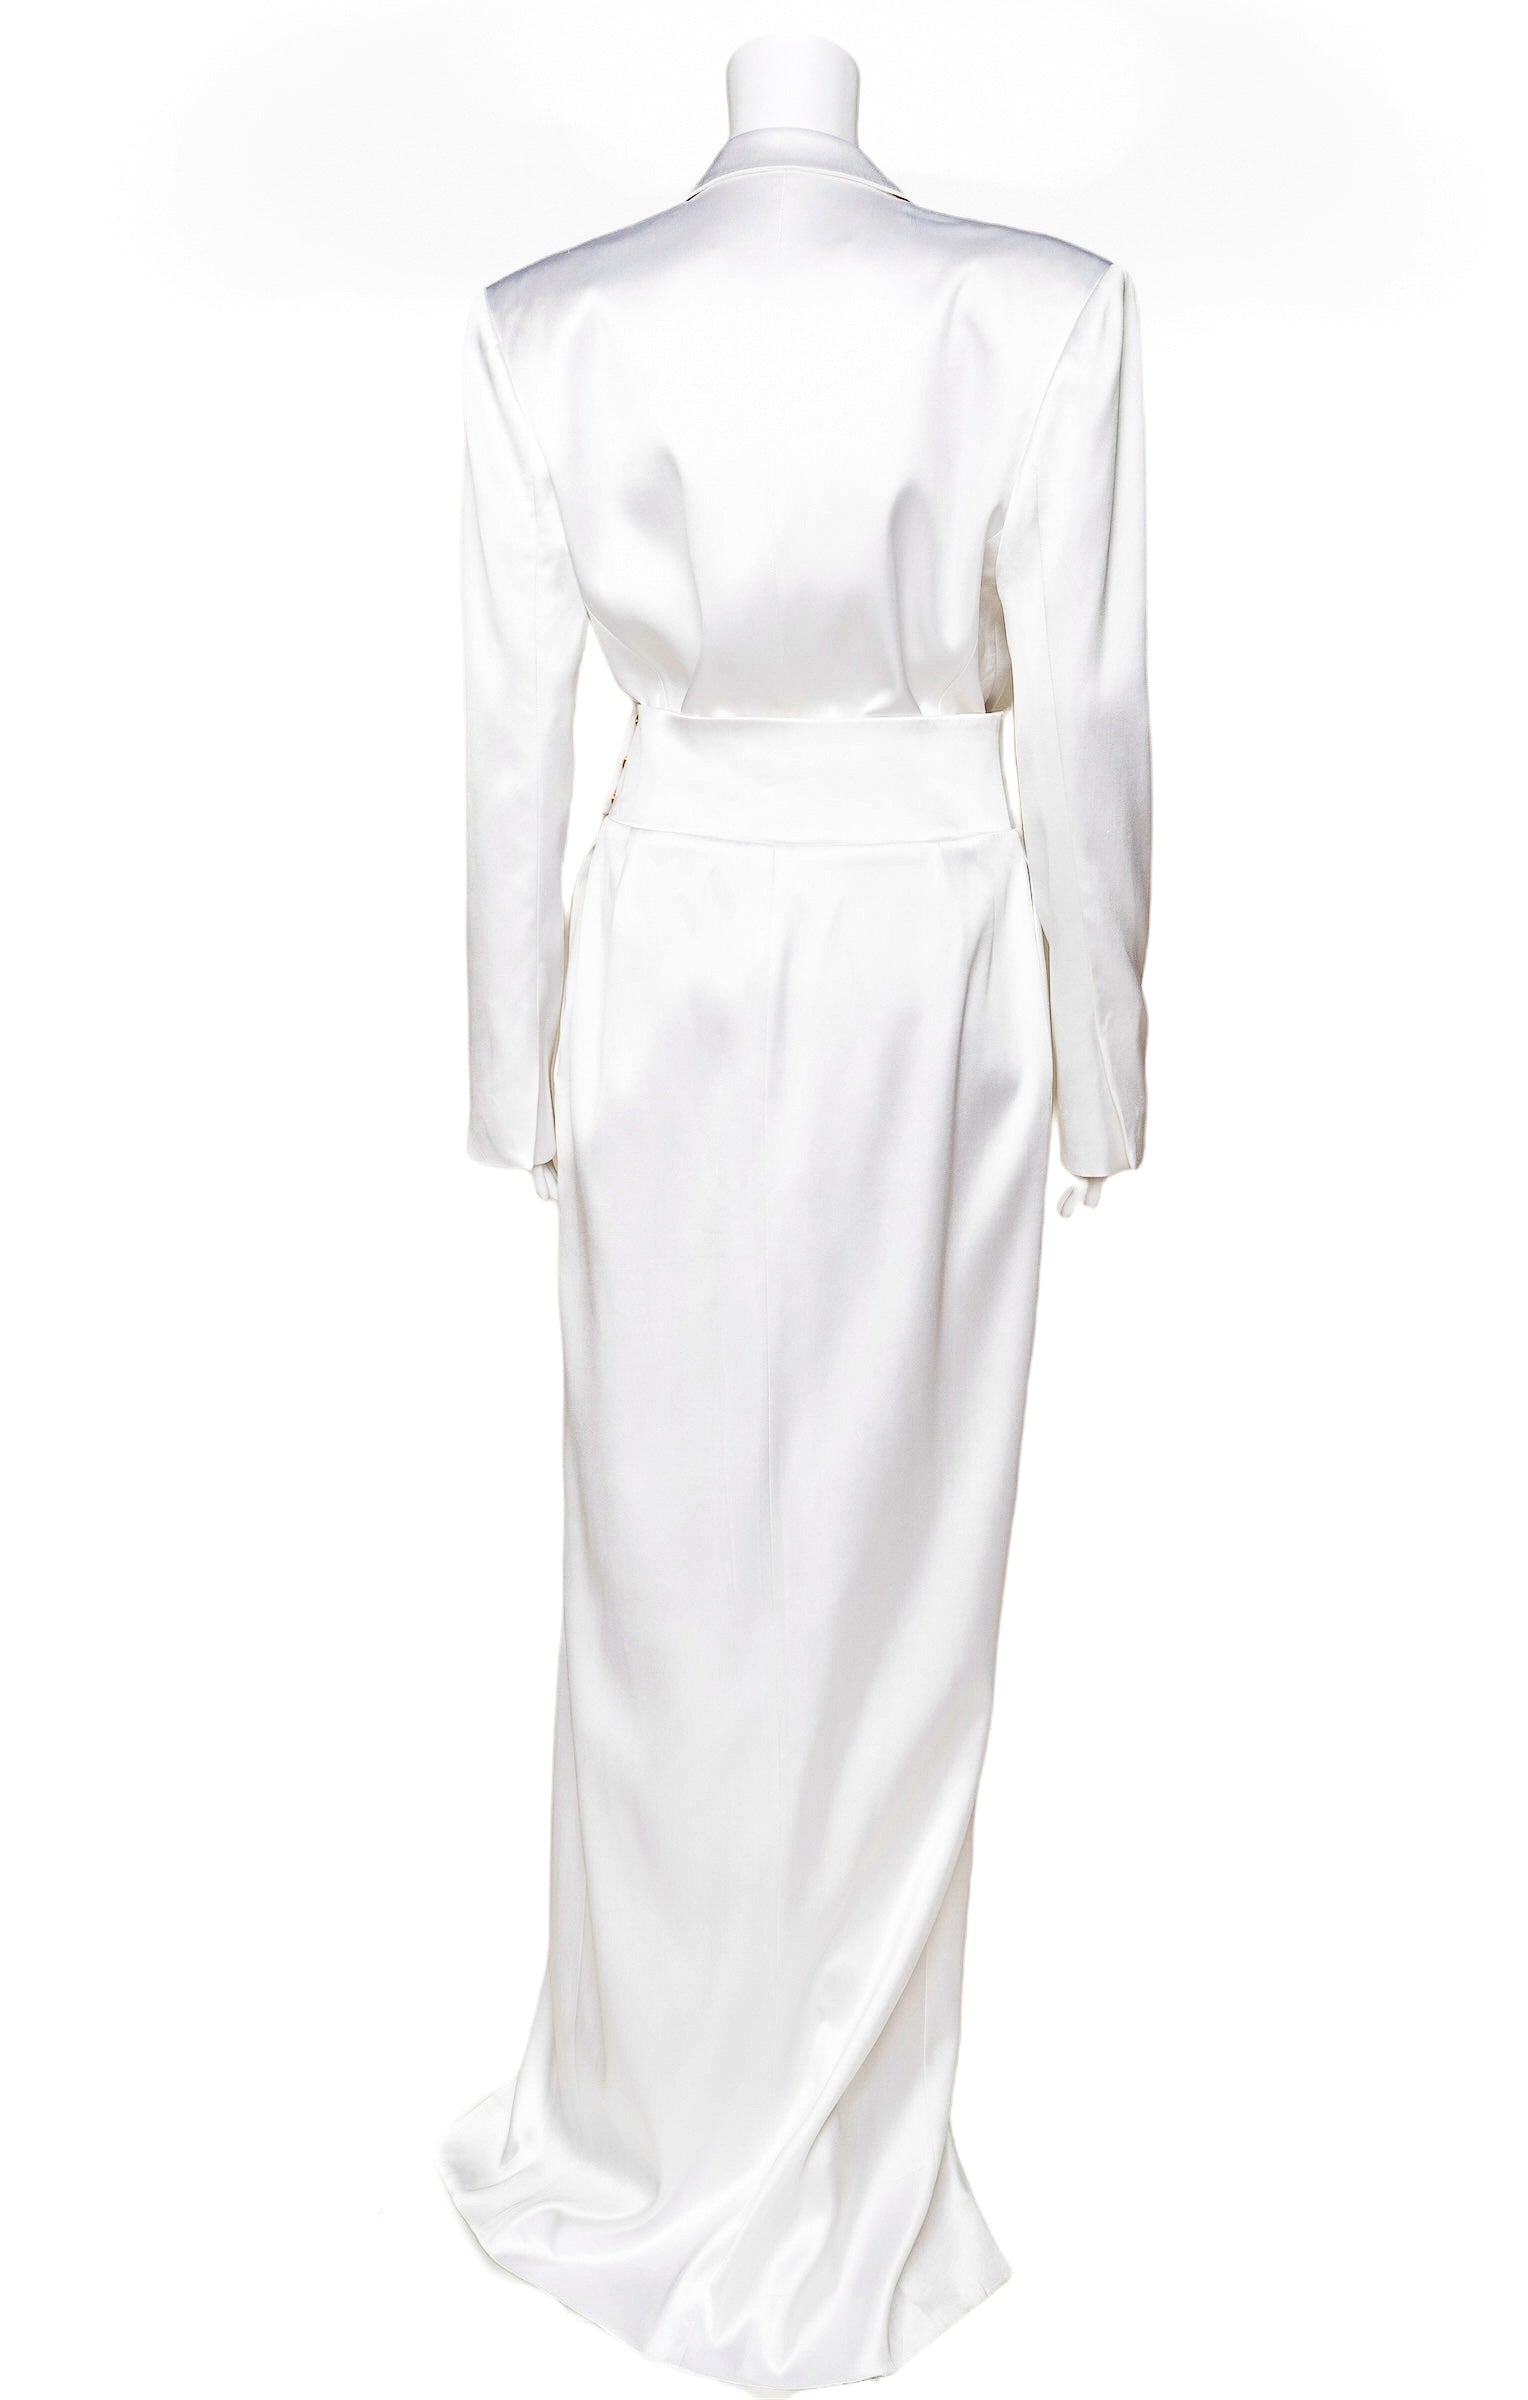 ALEXANDRE VAUTHIER Long Dress Size: FR 42 (comparable to US 10-12)